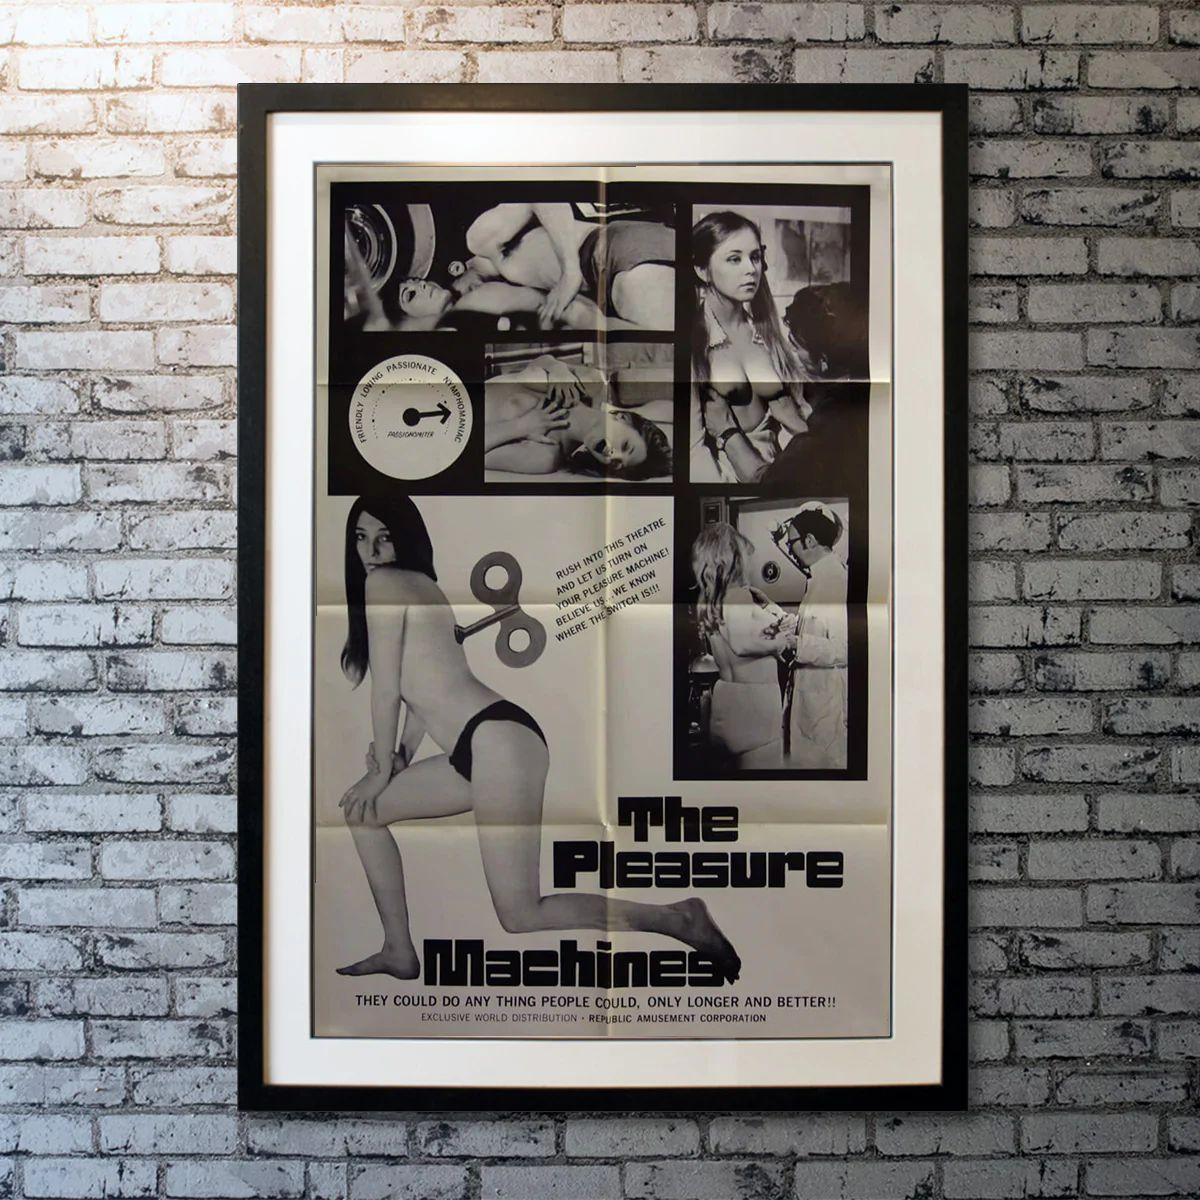 The Pleasure Machines, Unframed Poster, 1969

Original One Sheet (27 X 41 Inches). They could do anything people could. Only longer and better. Turn on your pleasure machine. We know where the switch is.

Year: 1969
Nationality: United